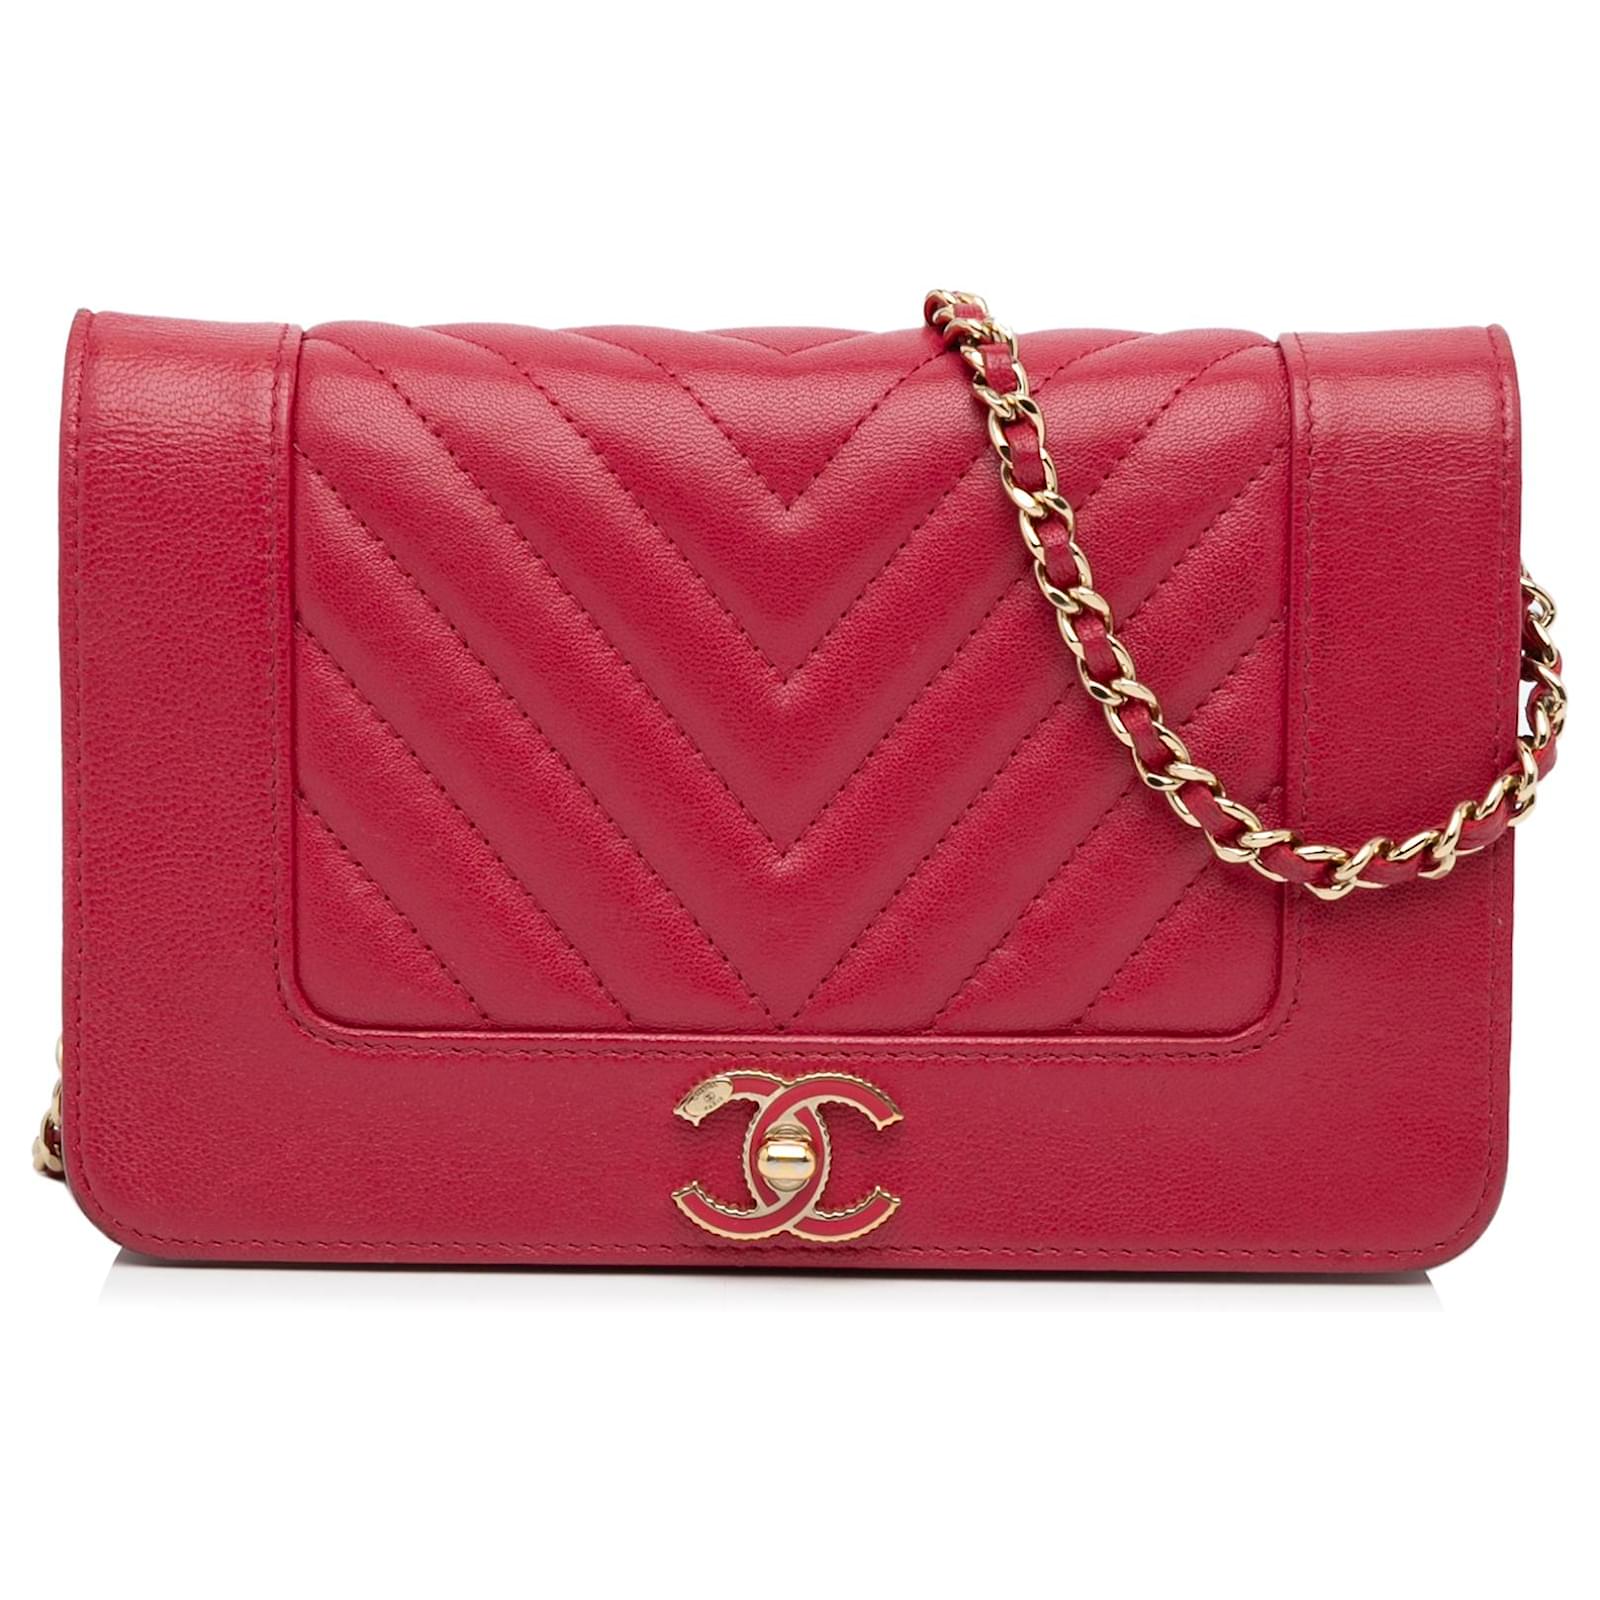 Chanel Quilted Accordion Mademoiselle Flap Bag